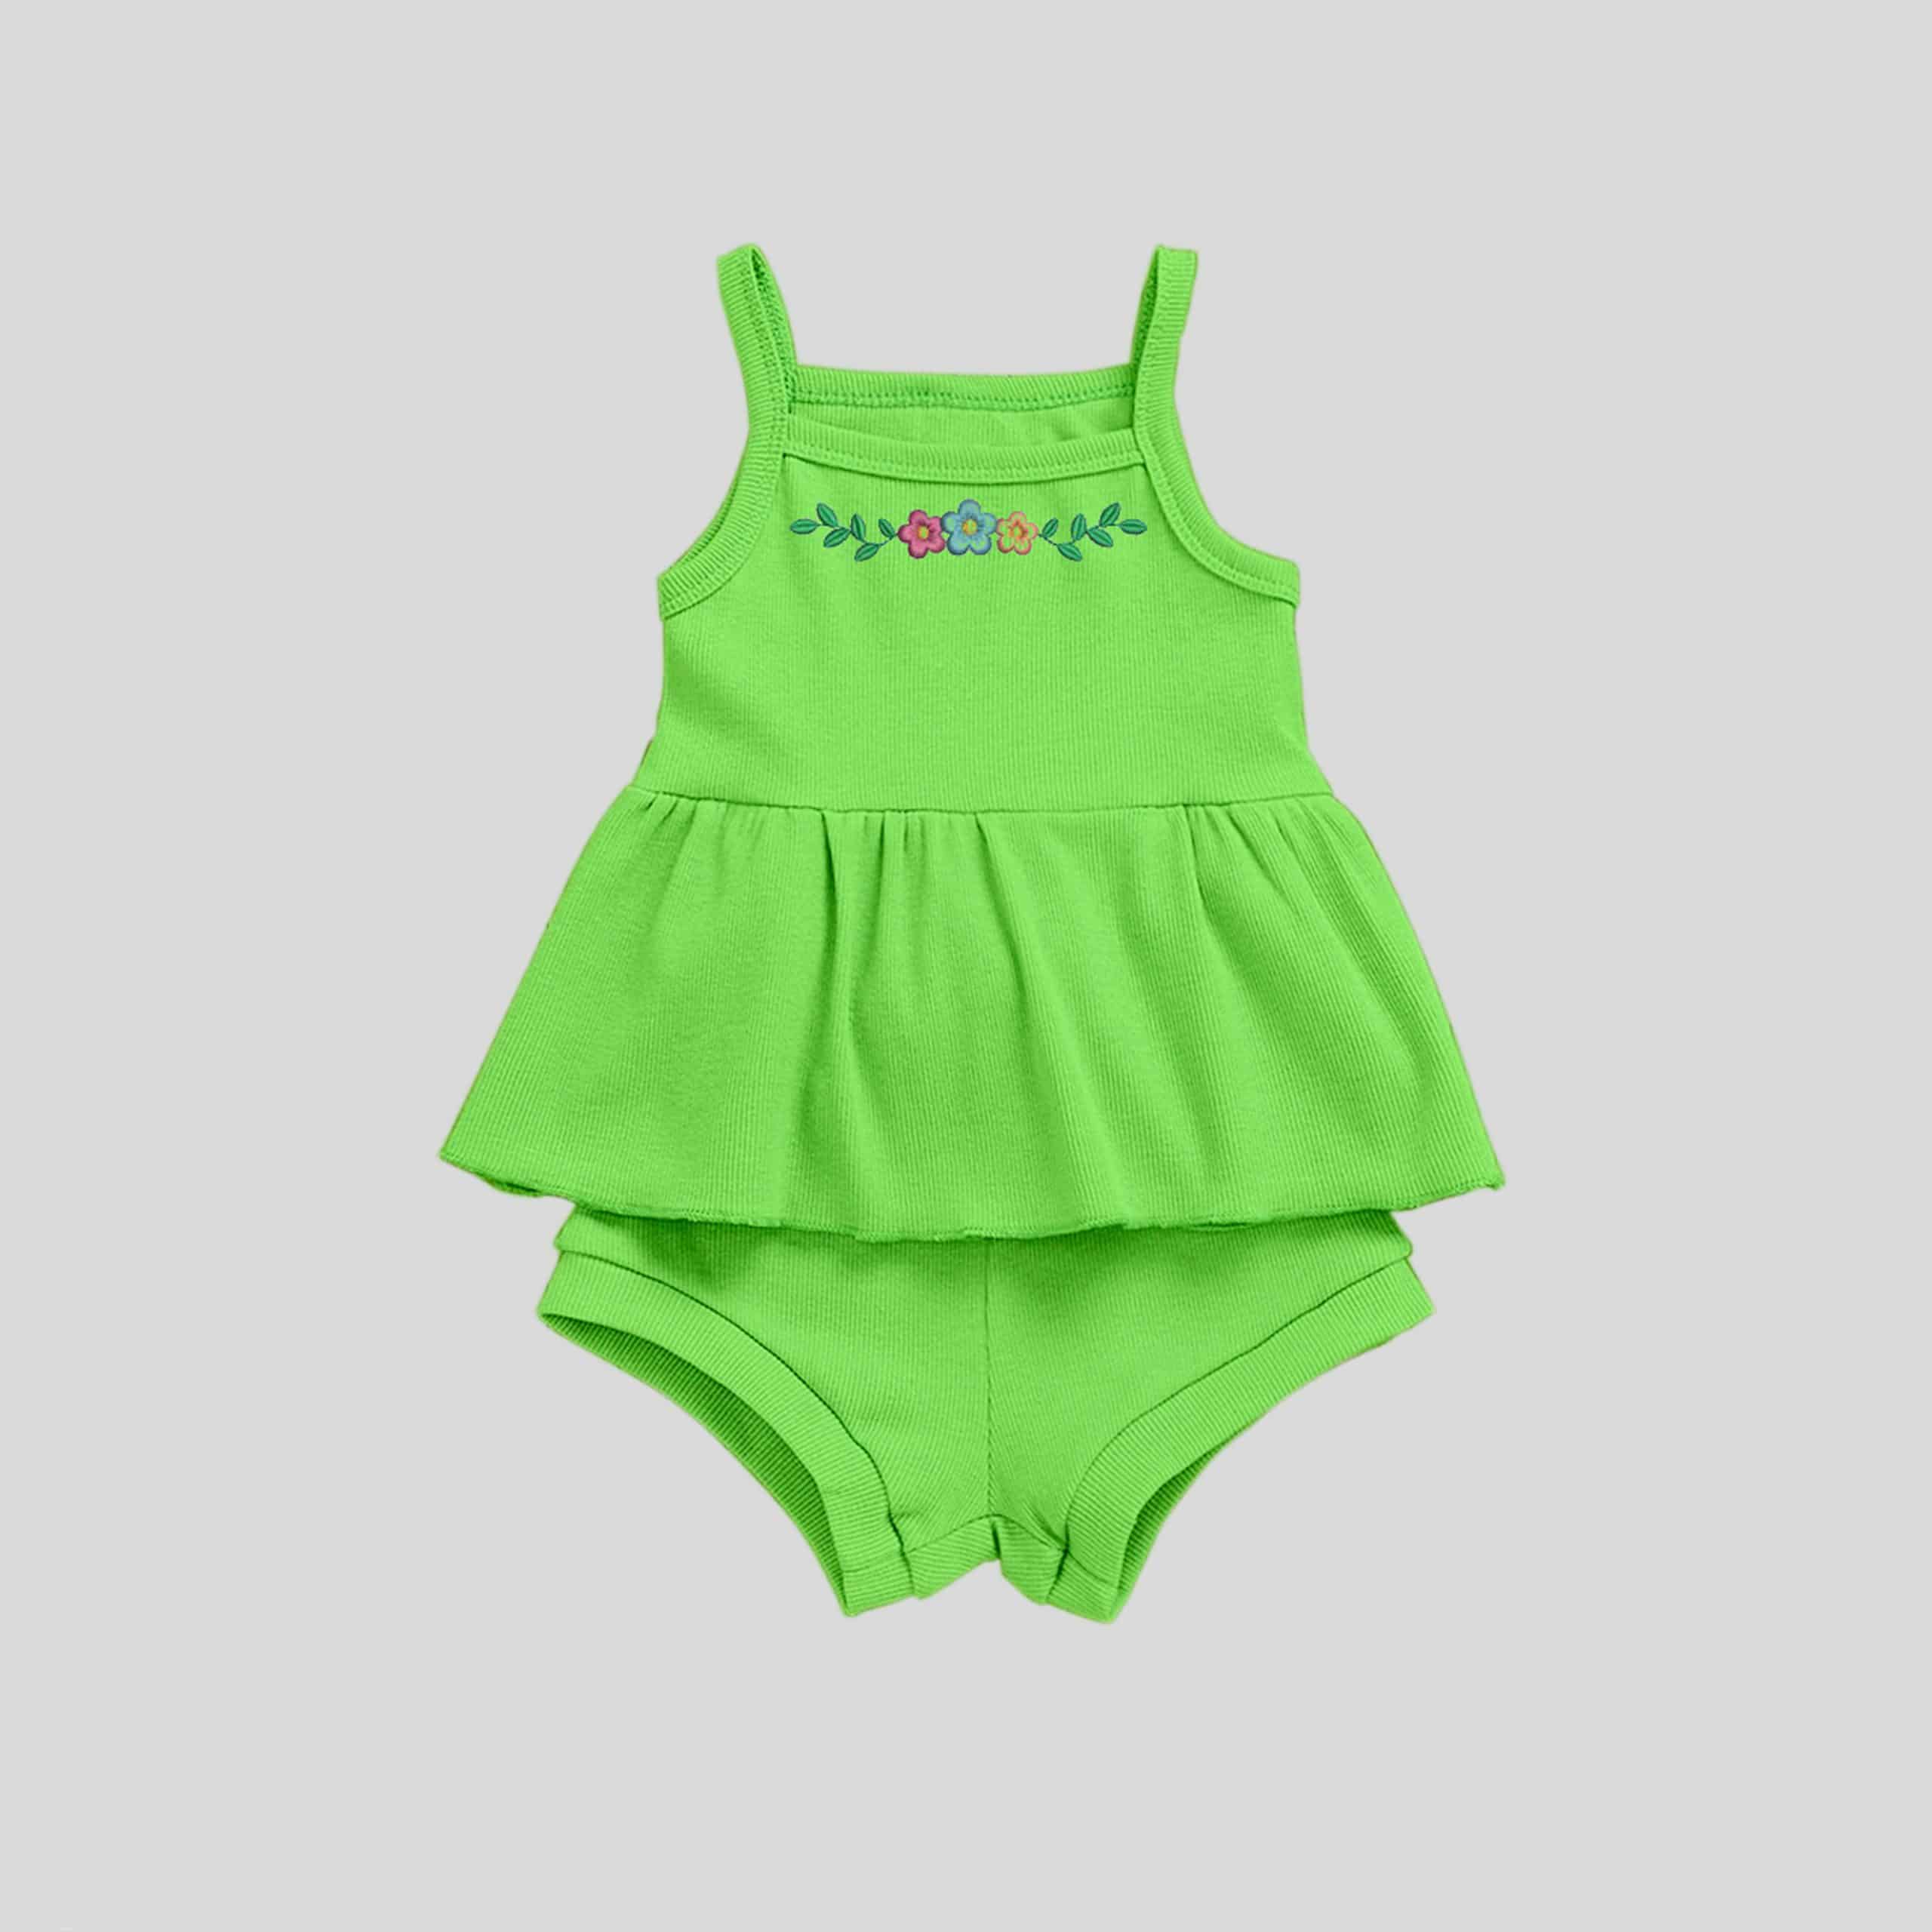 Girls bright green spaghetti top with cute floral print details and shorts set-RKFCW223